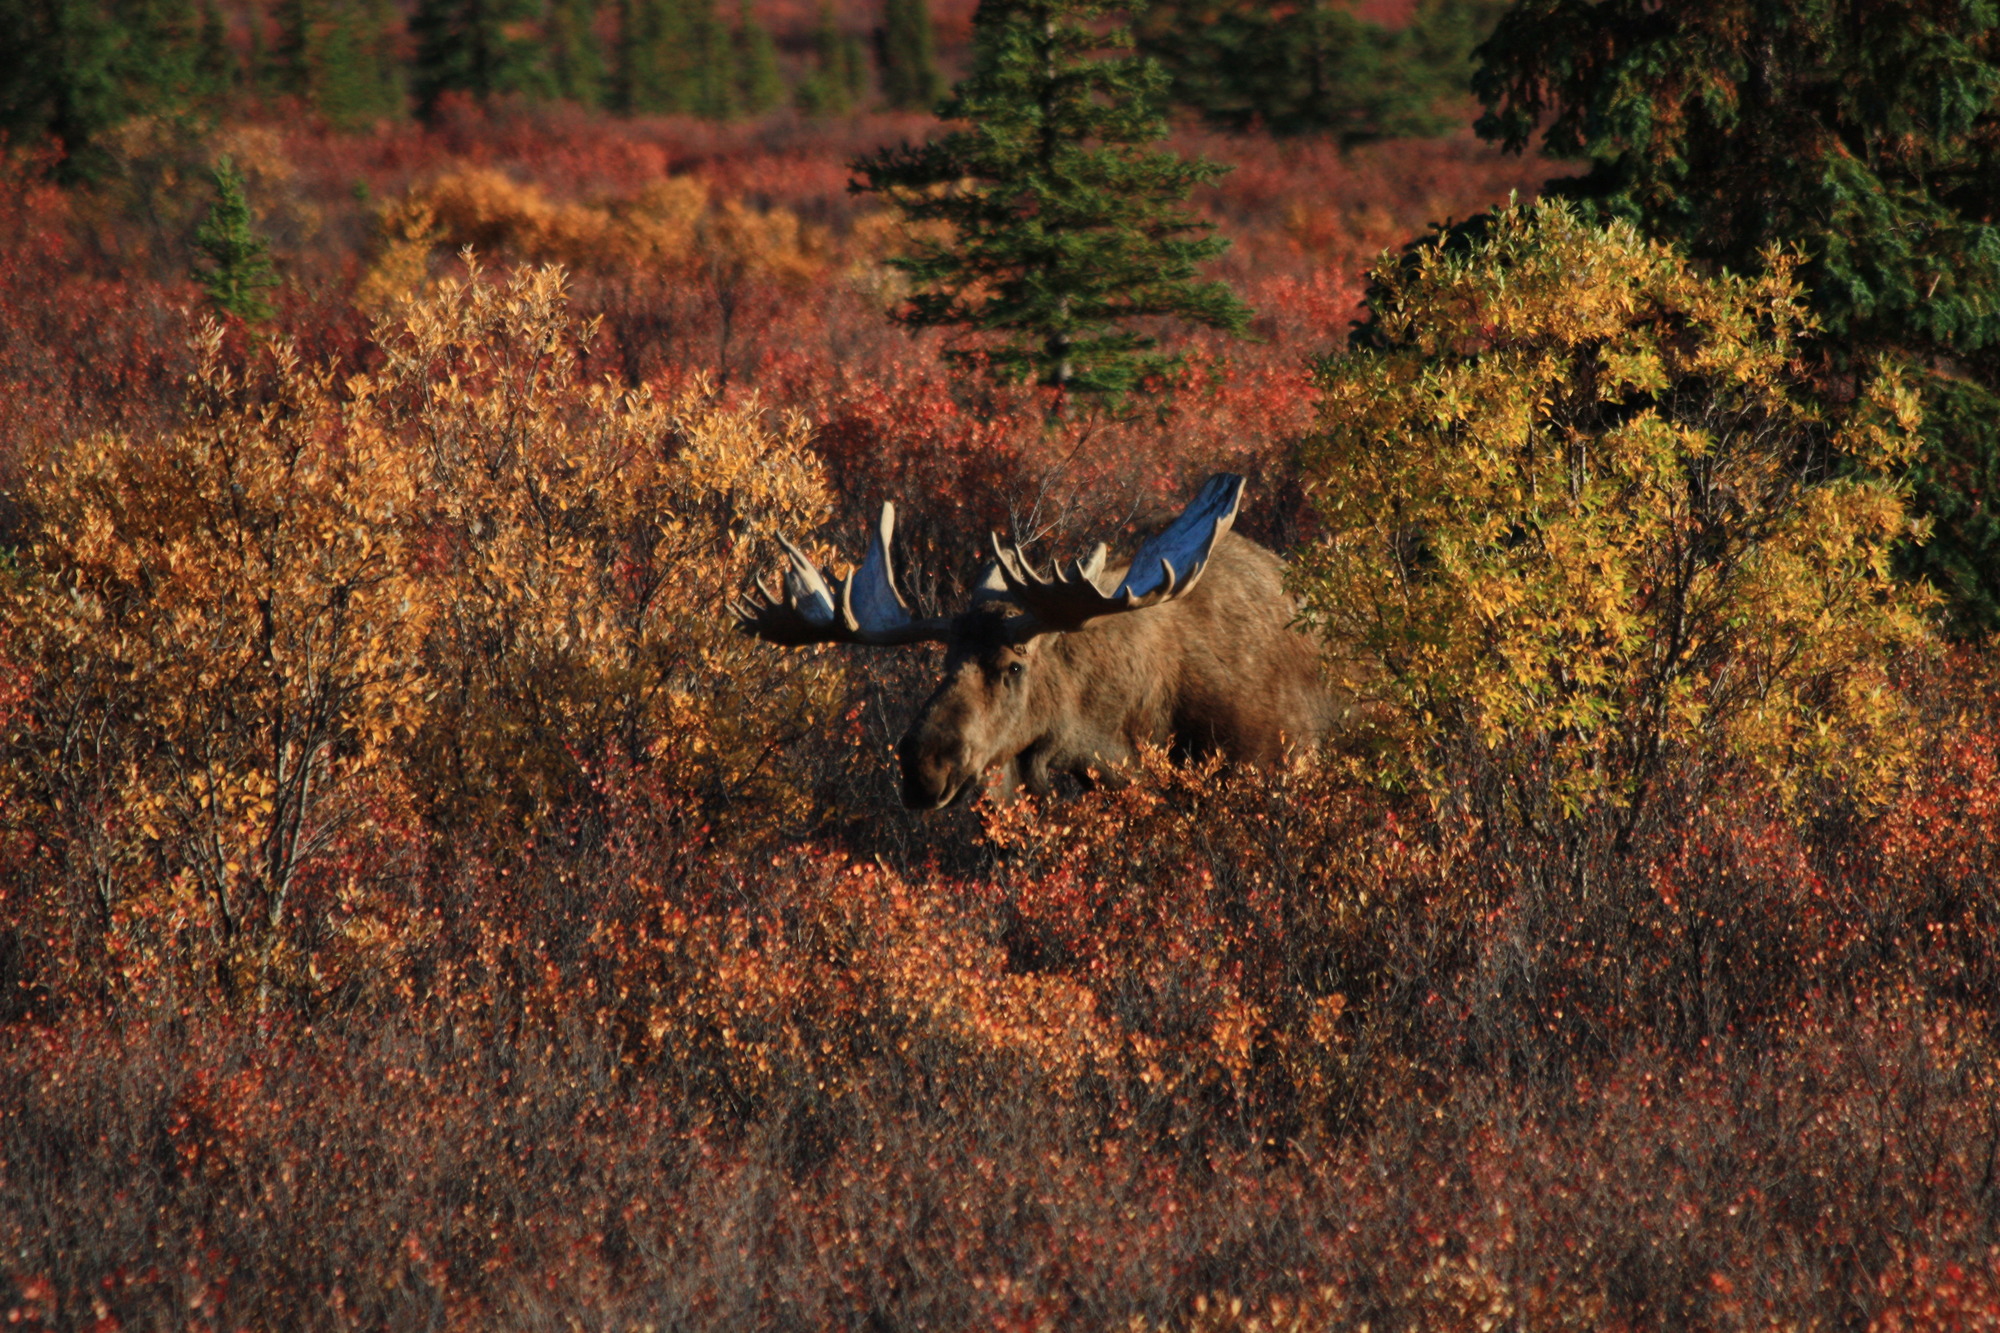 bull moose with large antlers standing in chest high bushes with red leaves